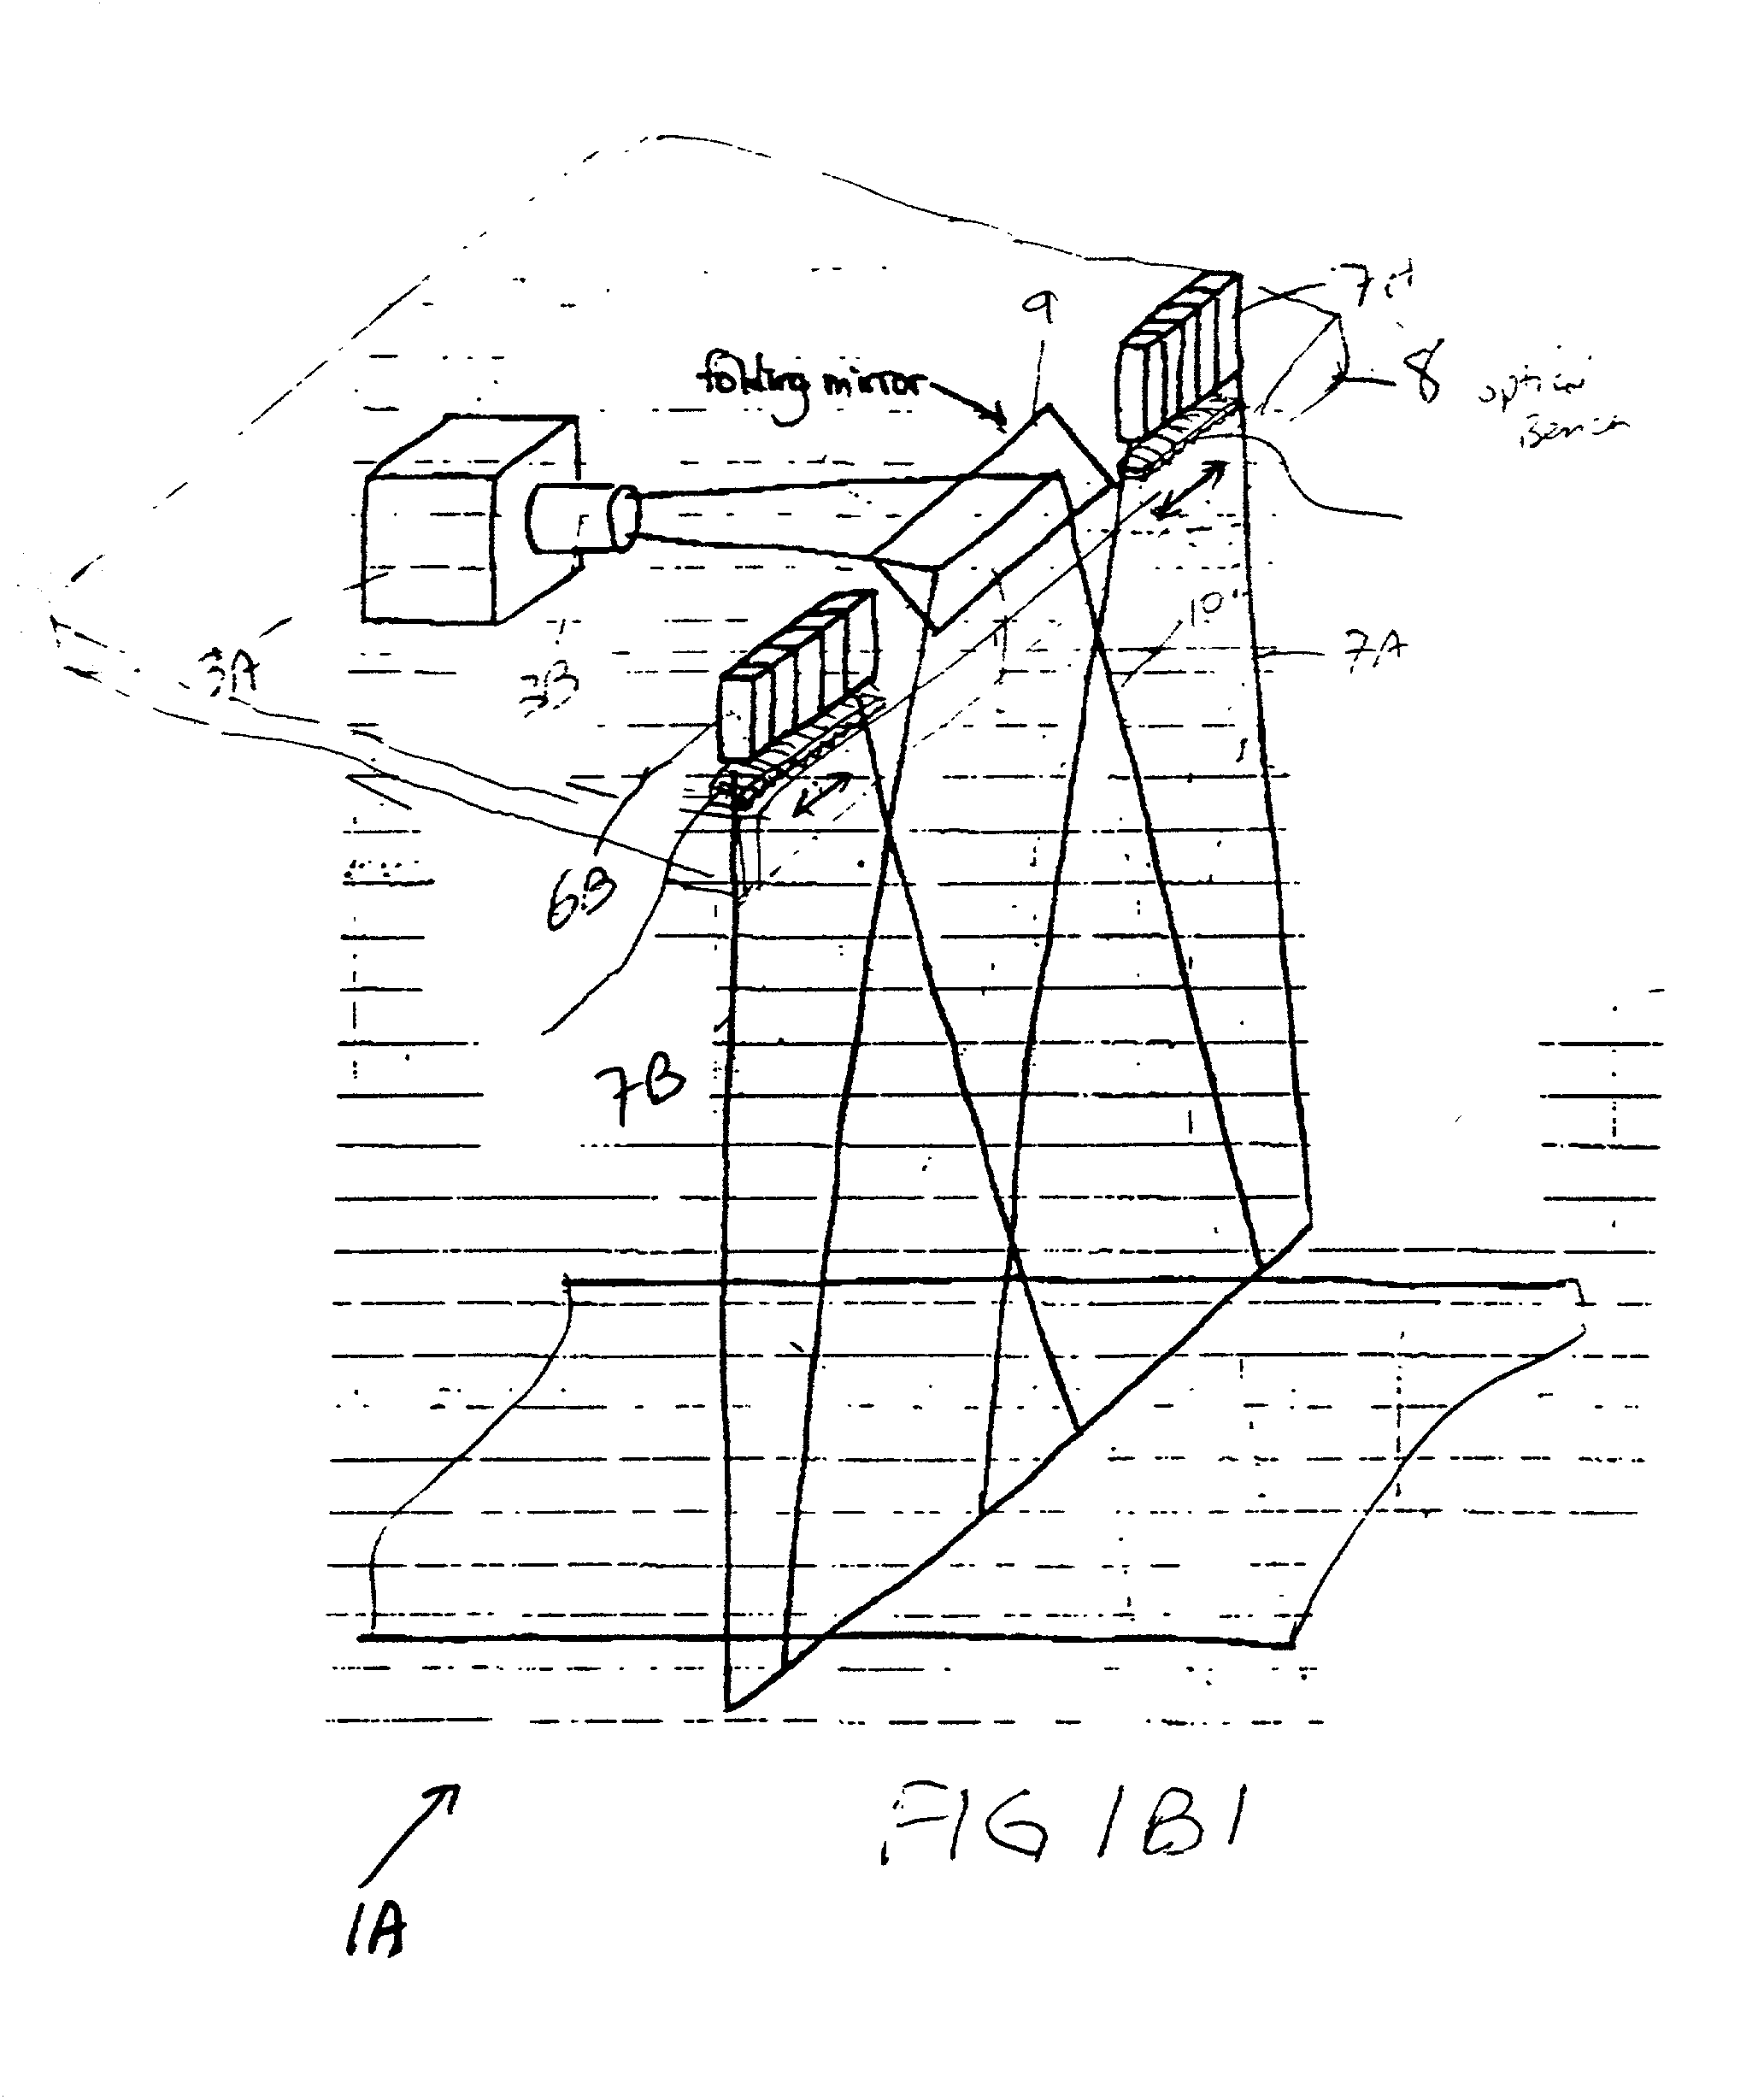 Method of and system for producing images of objects using planar laser illumination beams and image detection arrays